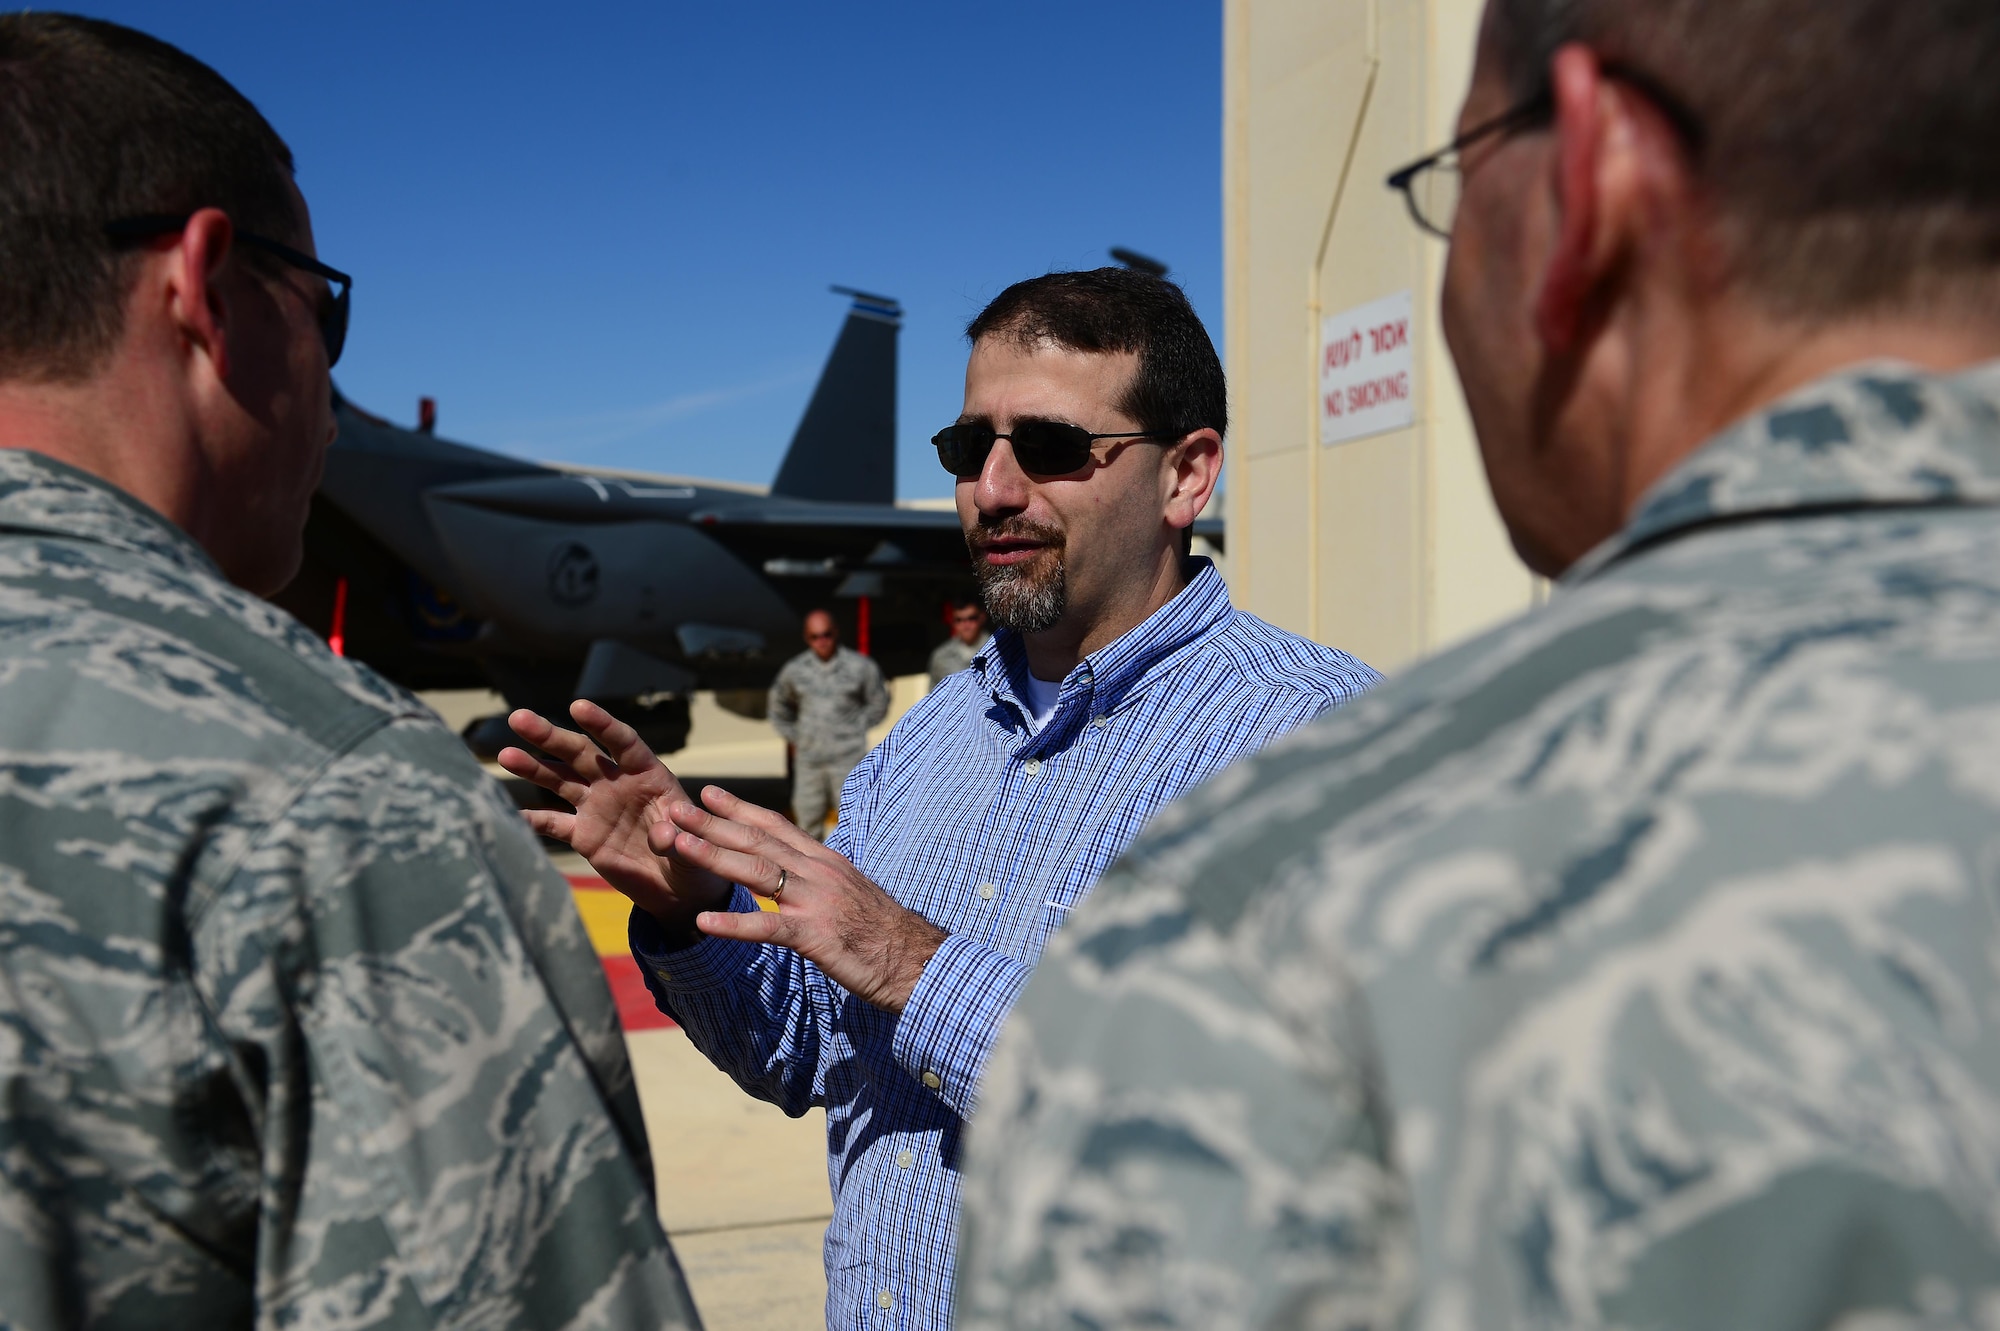 Dan Shapiro, U.S. Ambassador to Israel, talks with Capt. James Antone, 48th Aircraft Maintenance Squadron detachment commander (left), about post mission procedures Nov. 25, 2013, during the Blue Flag exercise at Uvda Air Force Base, Israel.  (U.S. Air Force photo/Master Sgt. Lee Osberry)